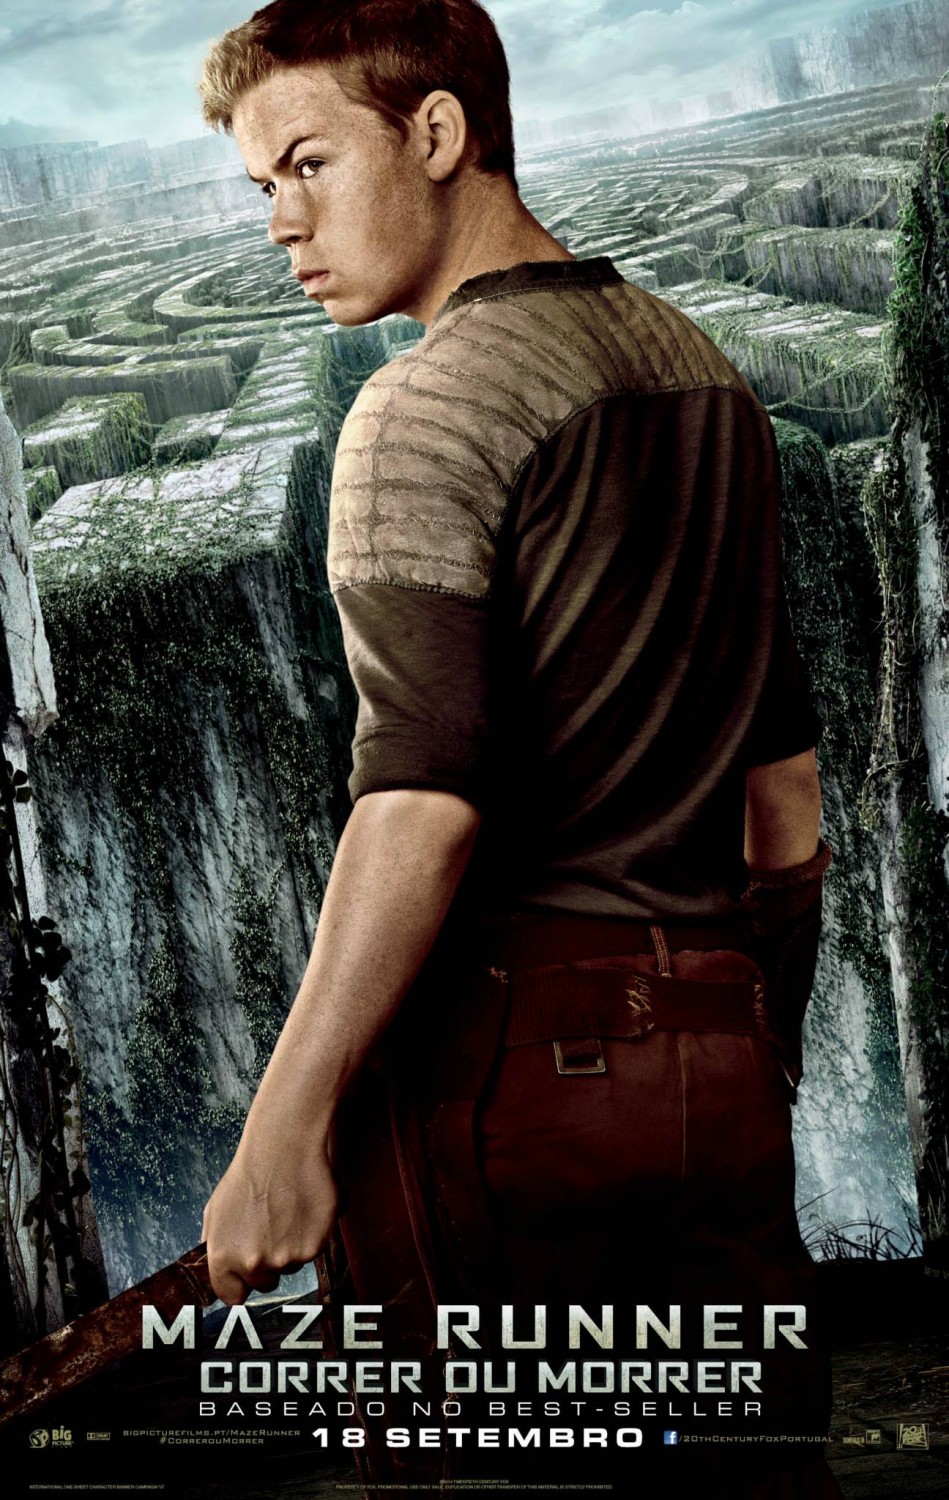 Extra Large Movie Poster Image for The Maze Runner (#19 of 24)